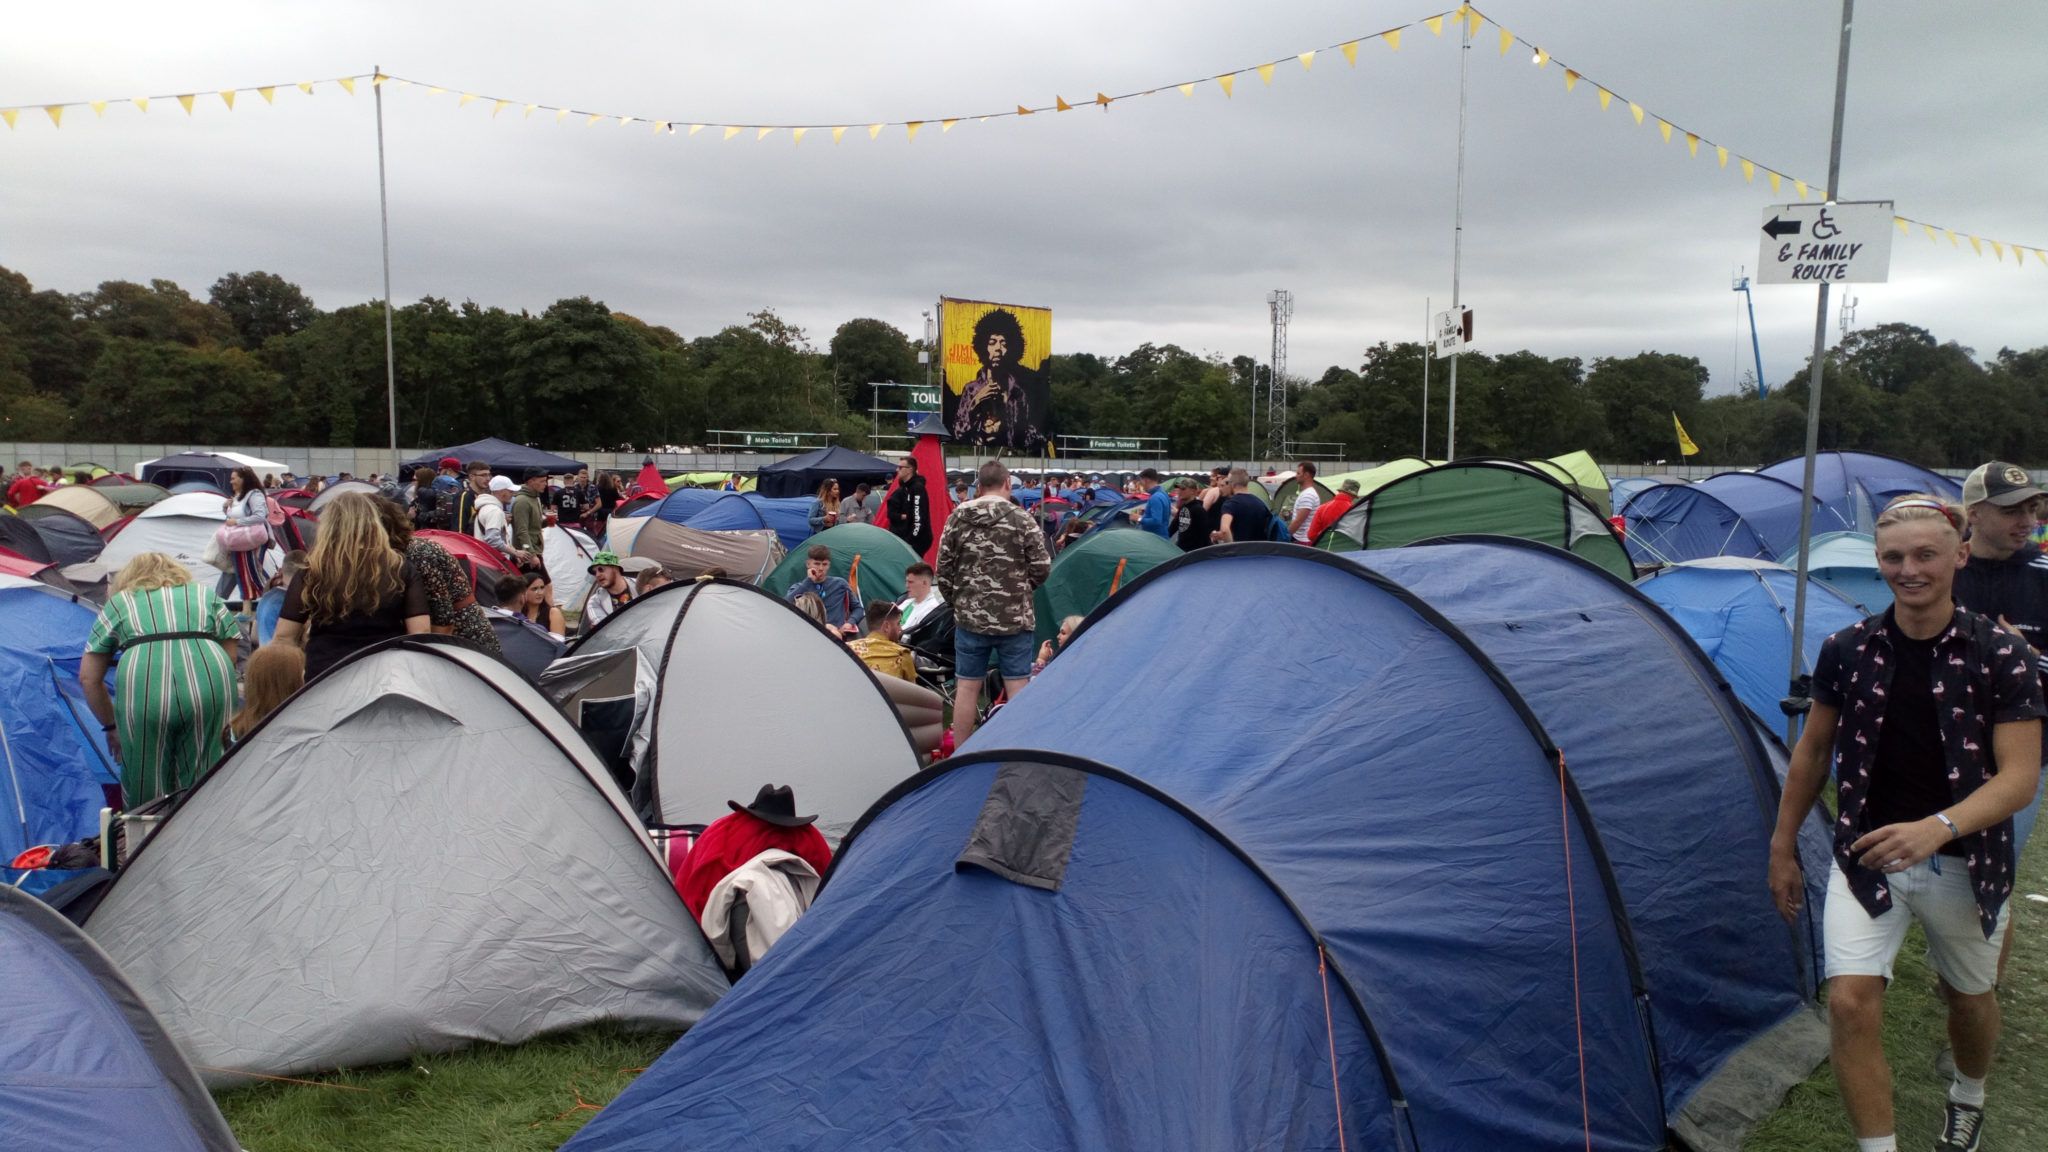 Met Éireann has issued a weather advisory for the entire Electric Picnic weekend